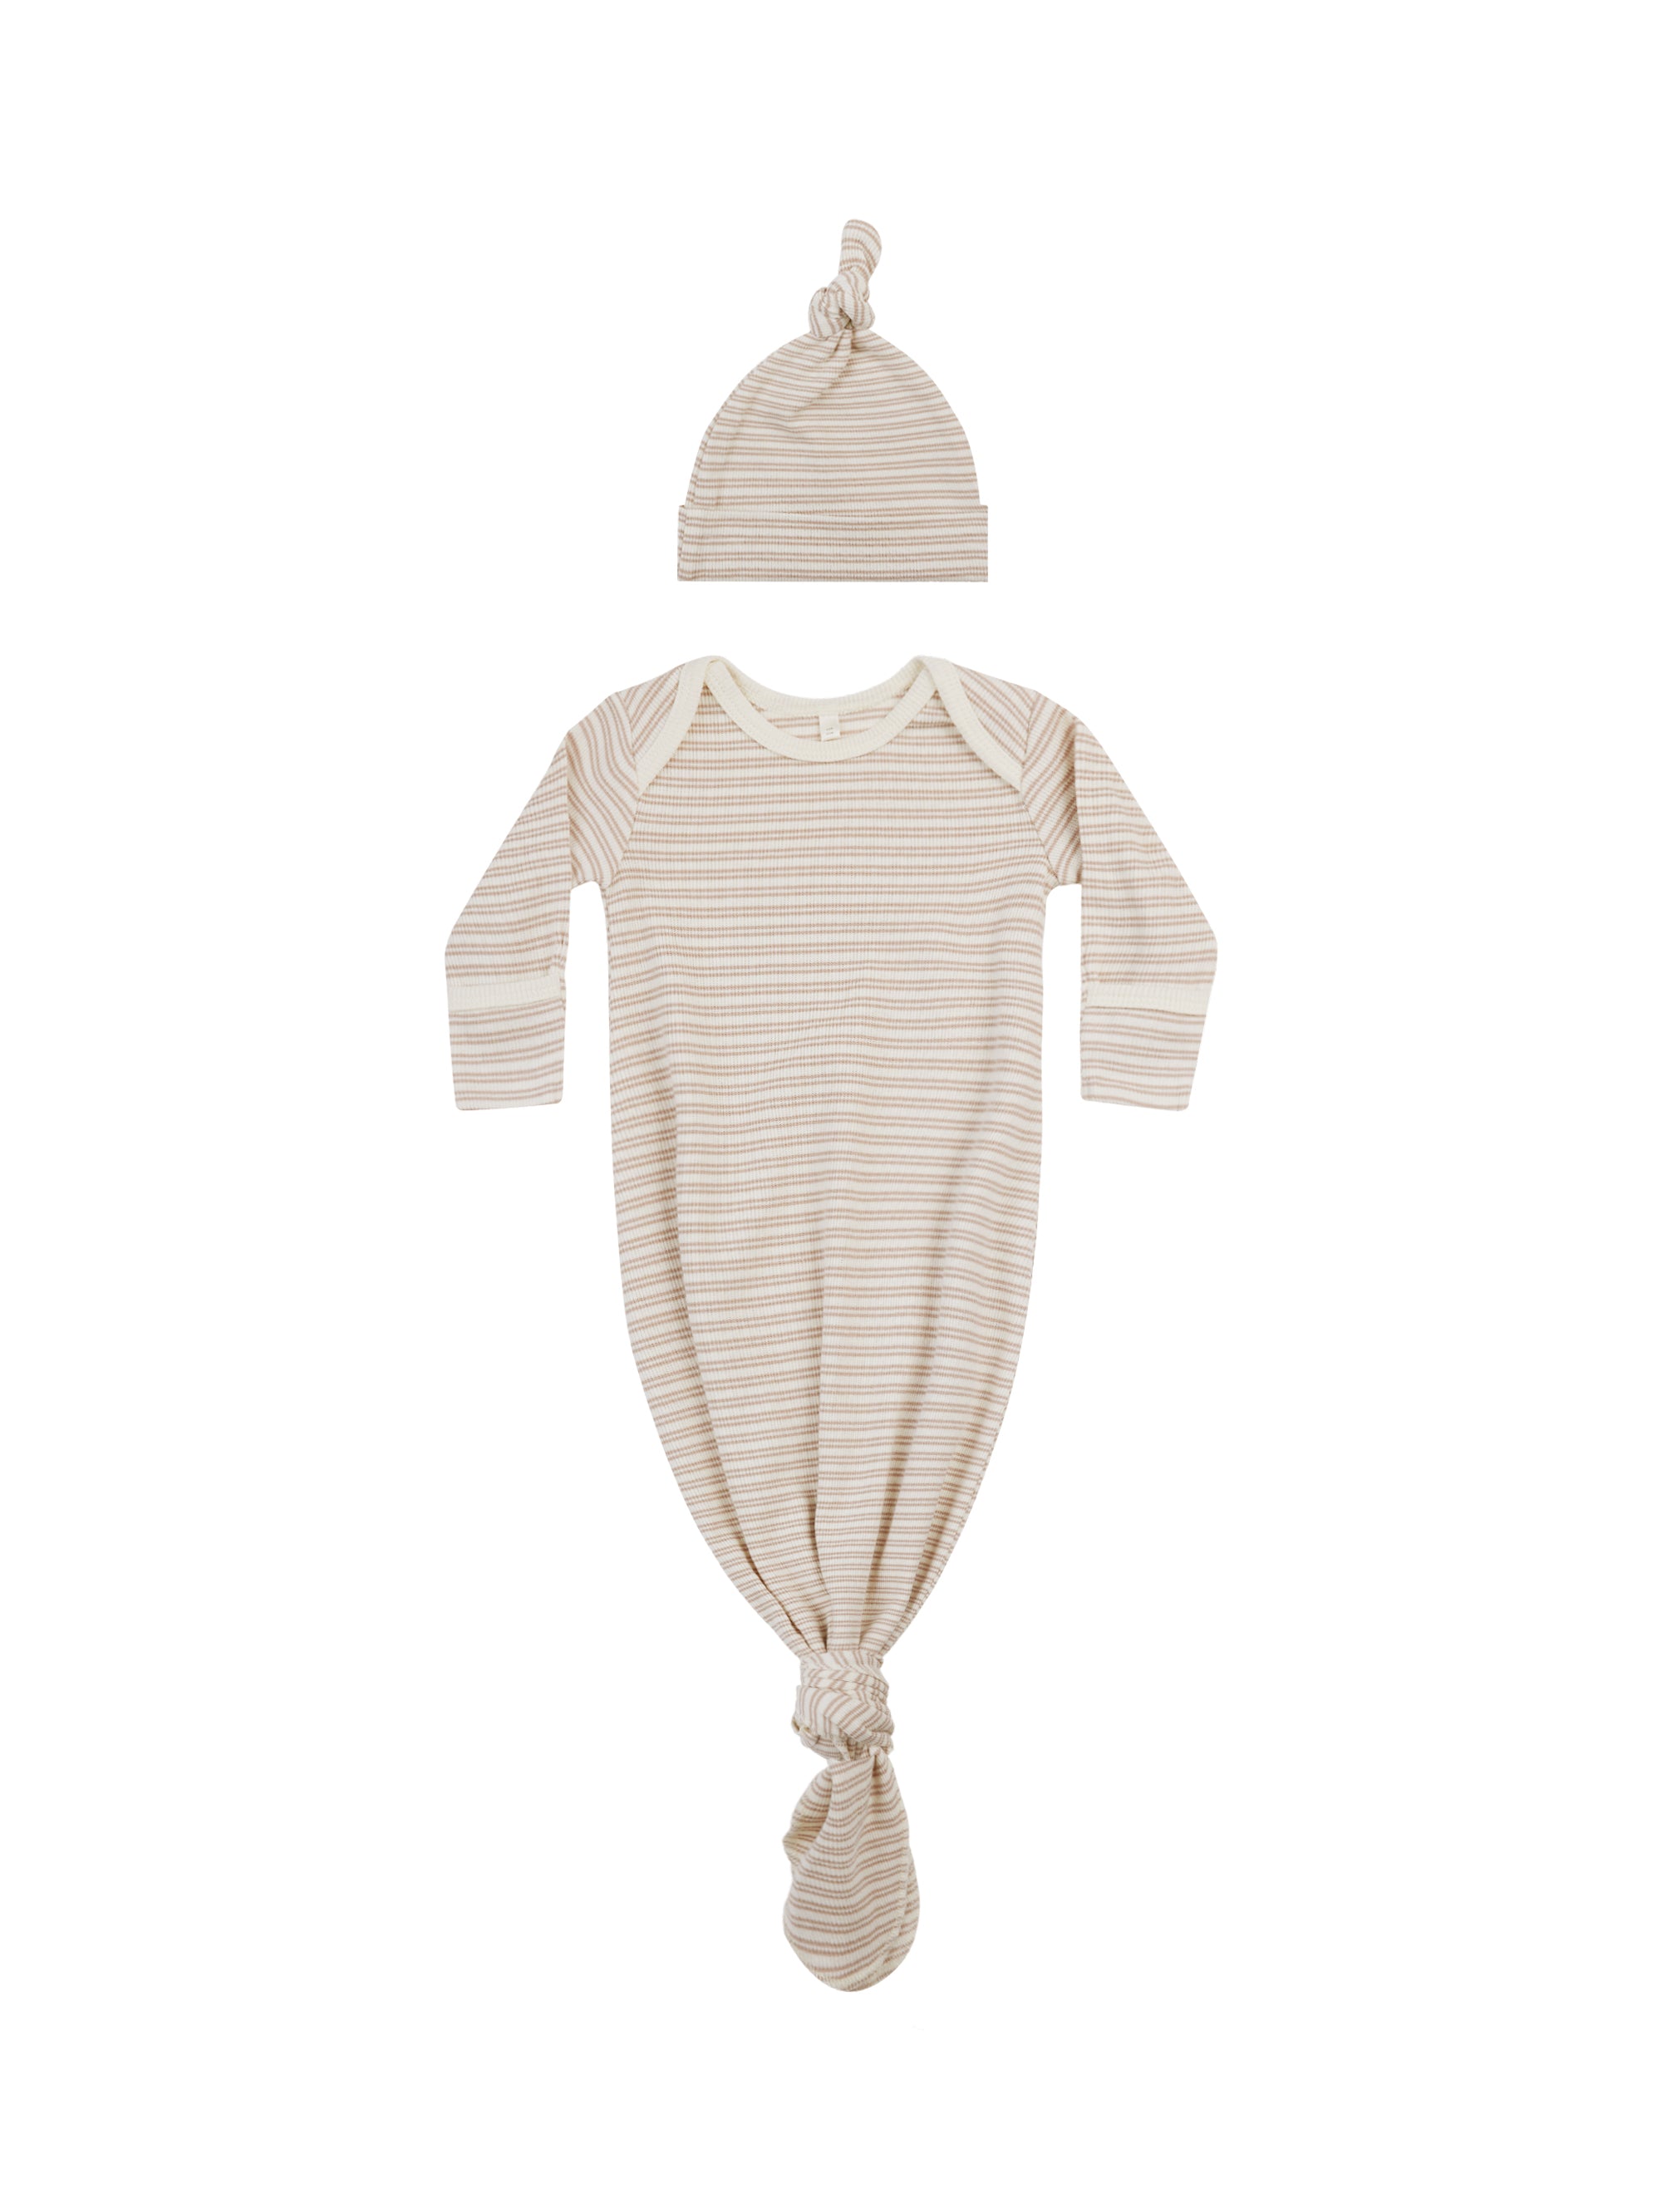 Quincy Mae Knotted Baby Gown & Hat Set / Oat Stripe